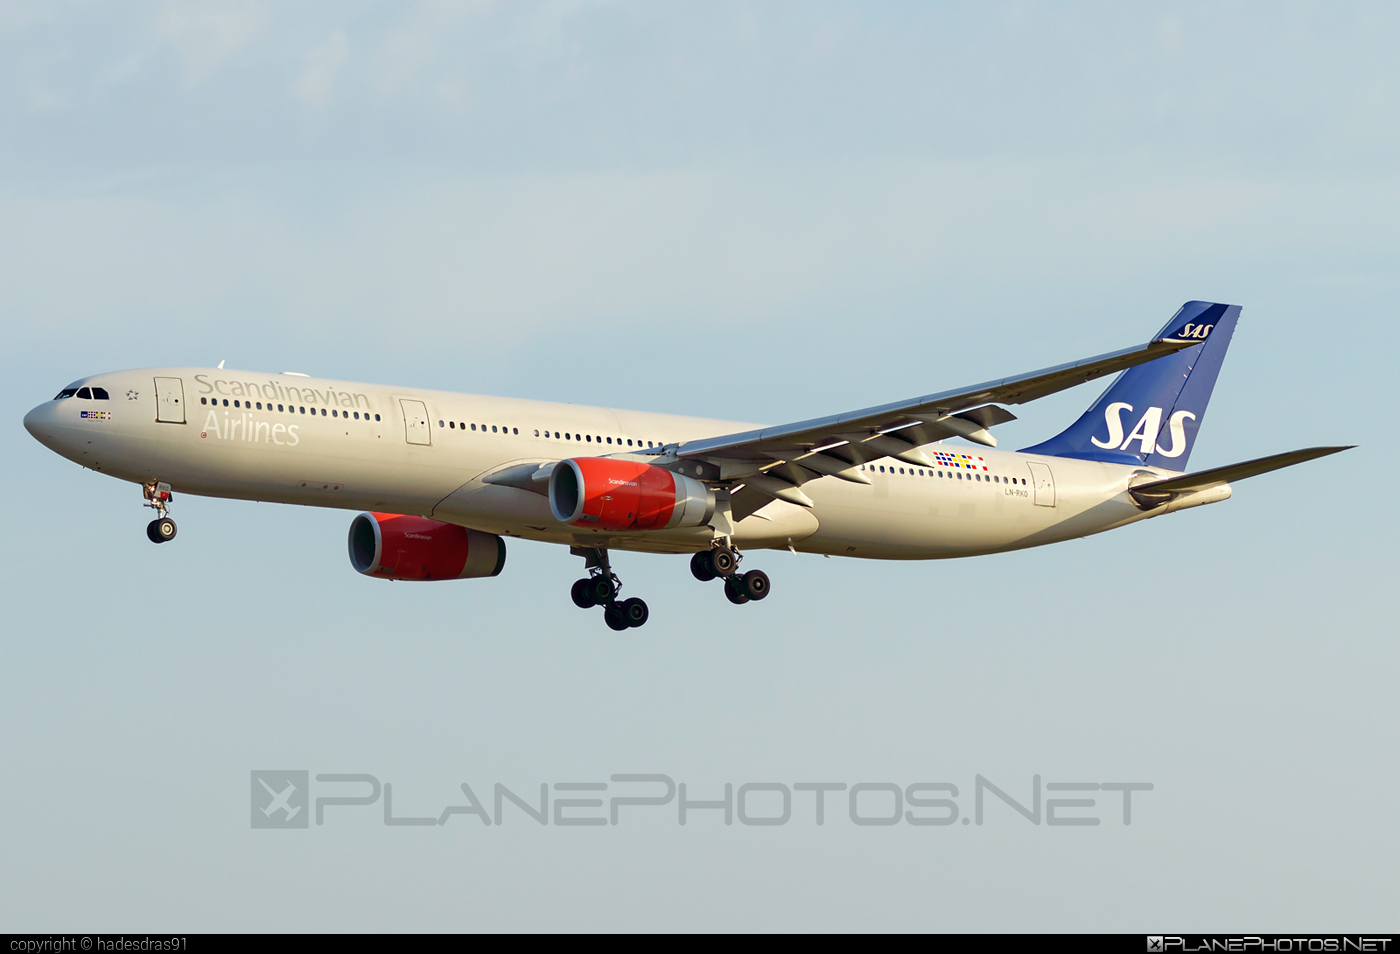 Airbus A330-343 - LN-RKO operated by Scandinavian Airlines (SAS) #a330 #a330family #airbus #airbus330 #sas #sasairlines #scandinavianairlines